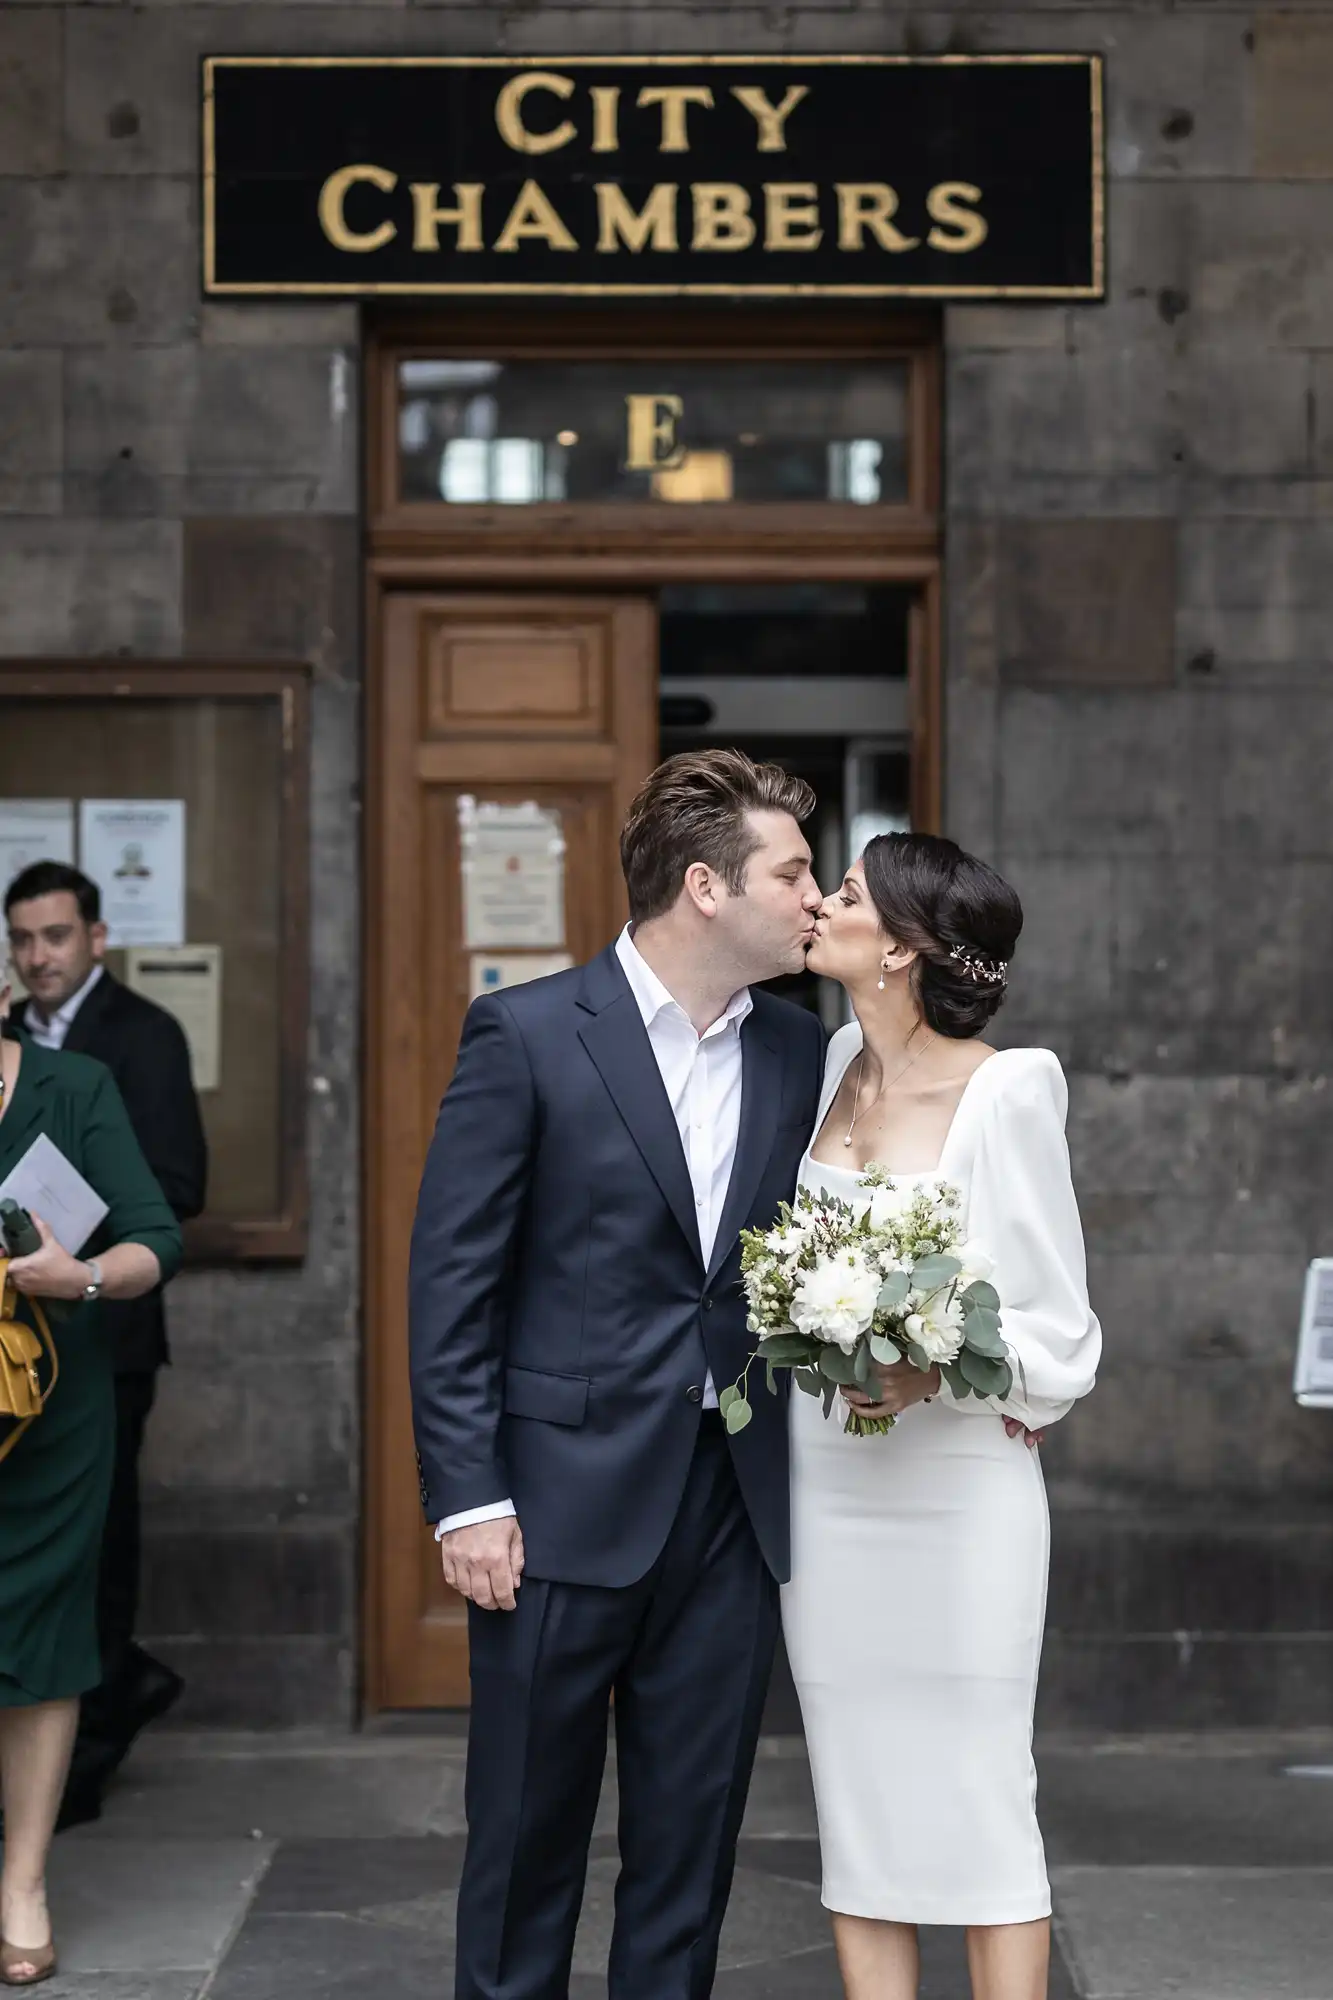 A newlywed couple kissing outside the city chambers, with the bride holding a bouquet and the groom in a suit.